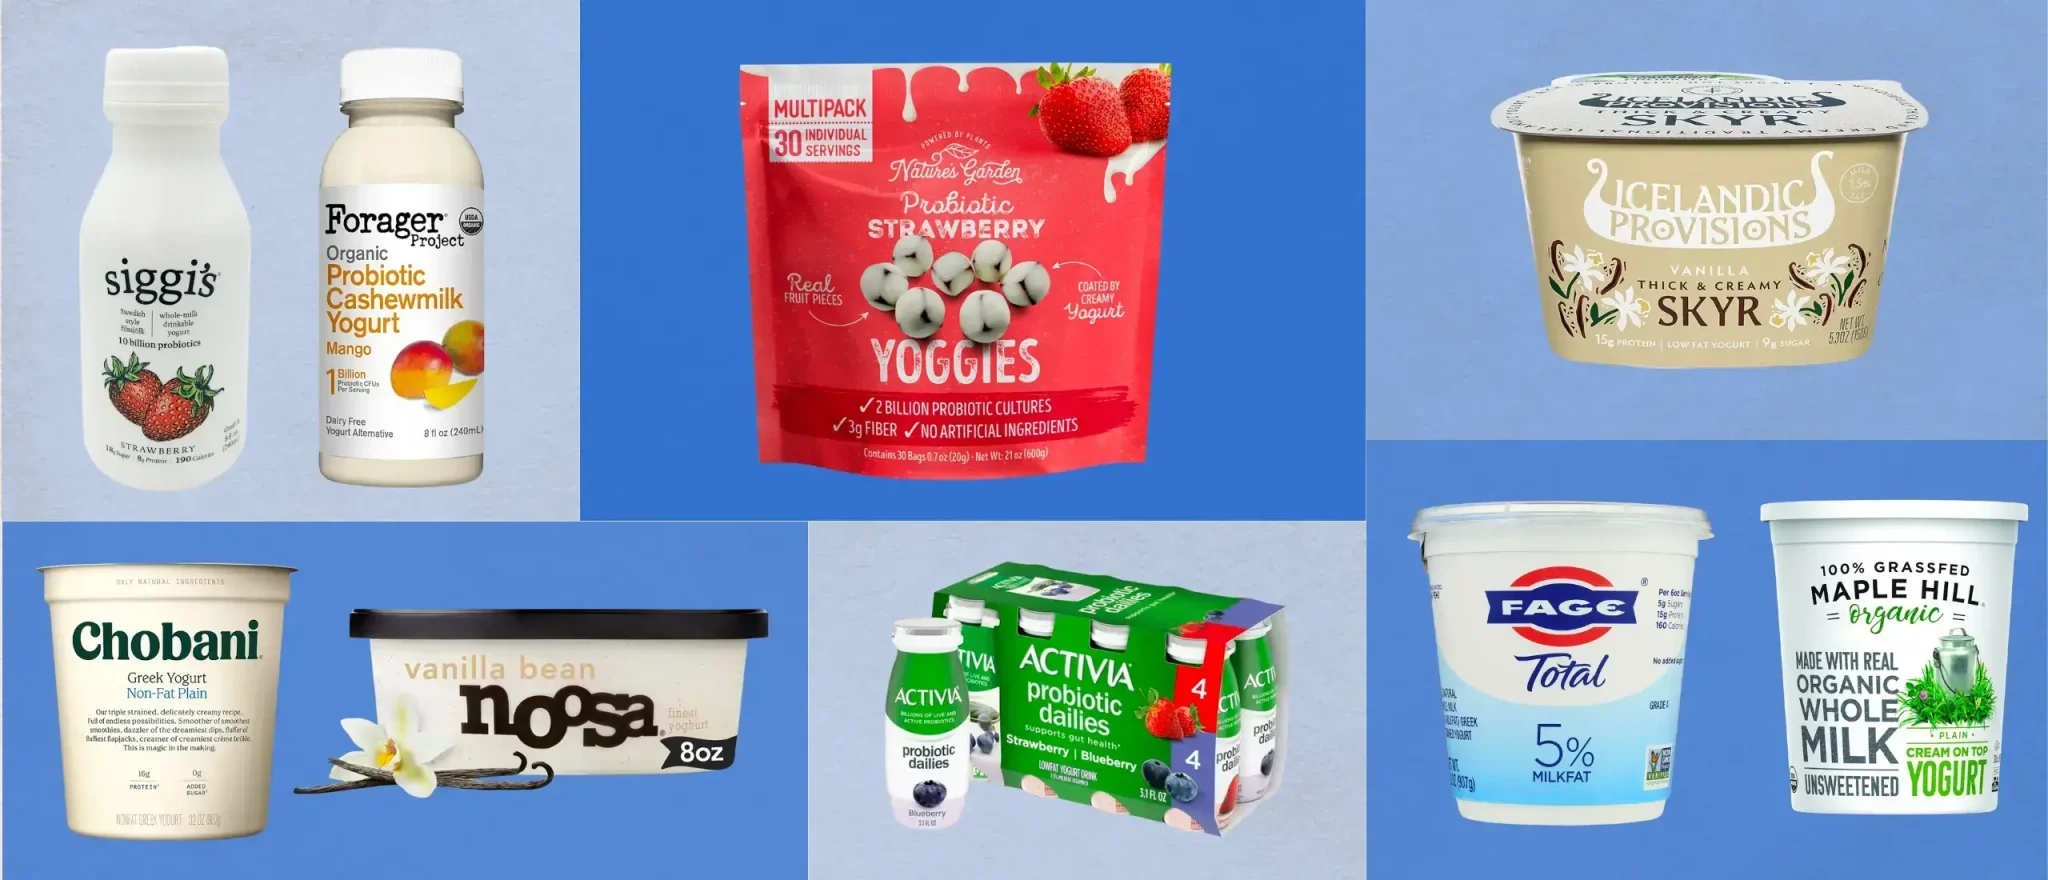 Probiotic Yogurts: Are They Legit, and Which Are Actually Worth Trying?